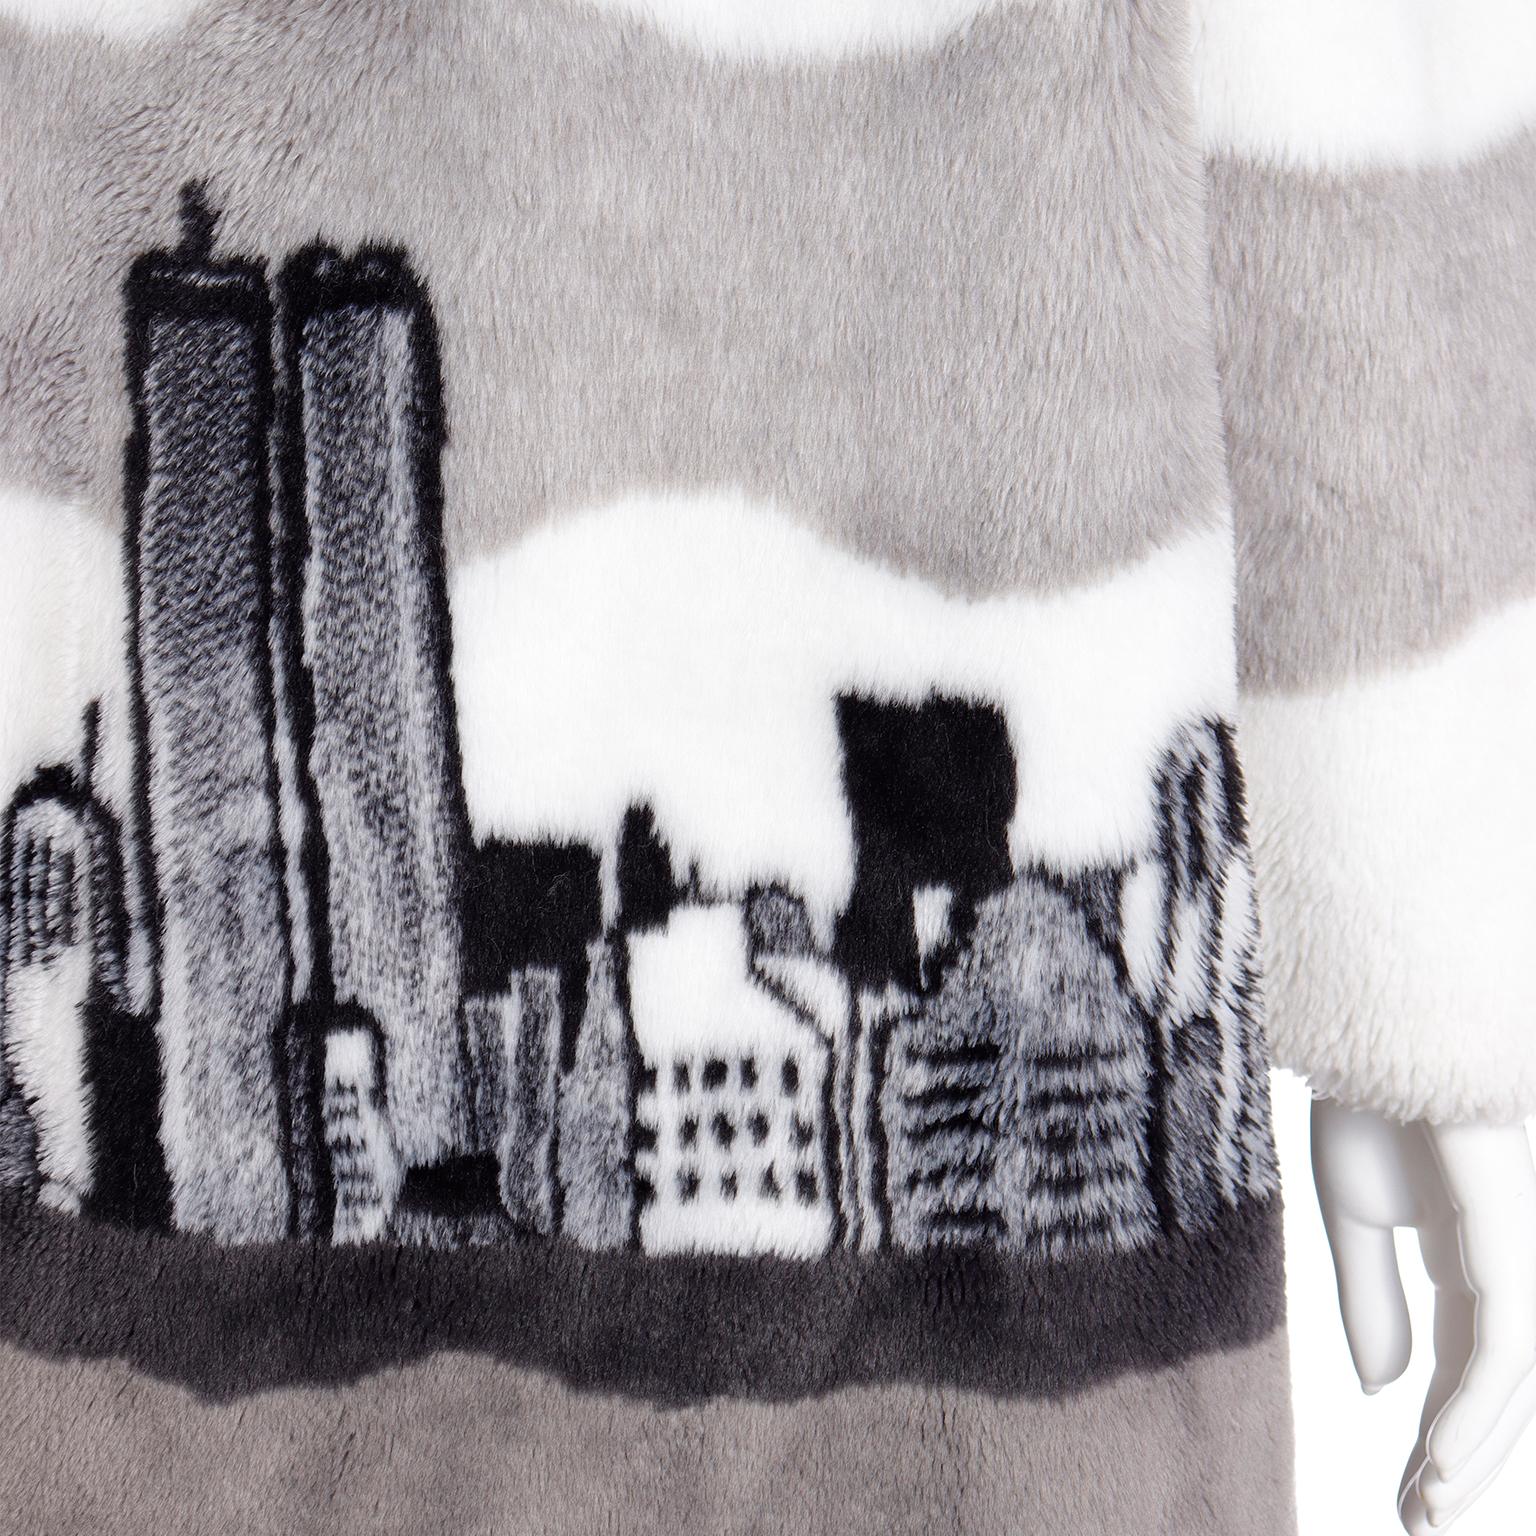 1980s Vintage NYC Skyline Twin Towers White Black & Grey Faux Fur Coat For Sale 4